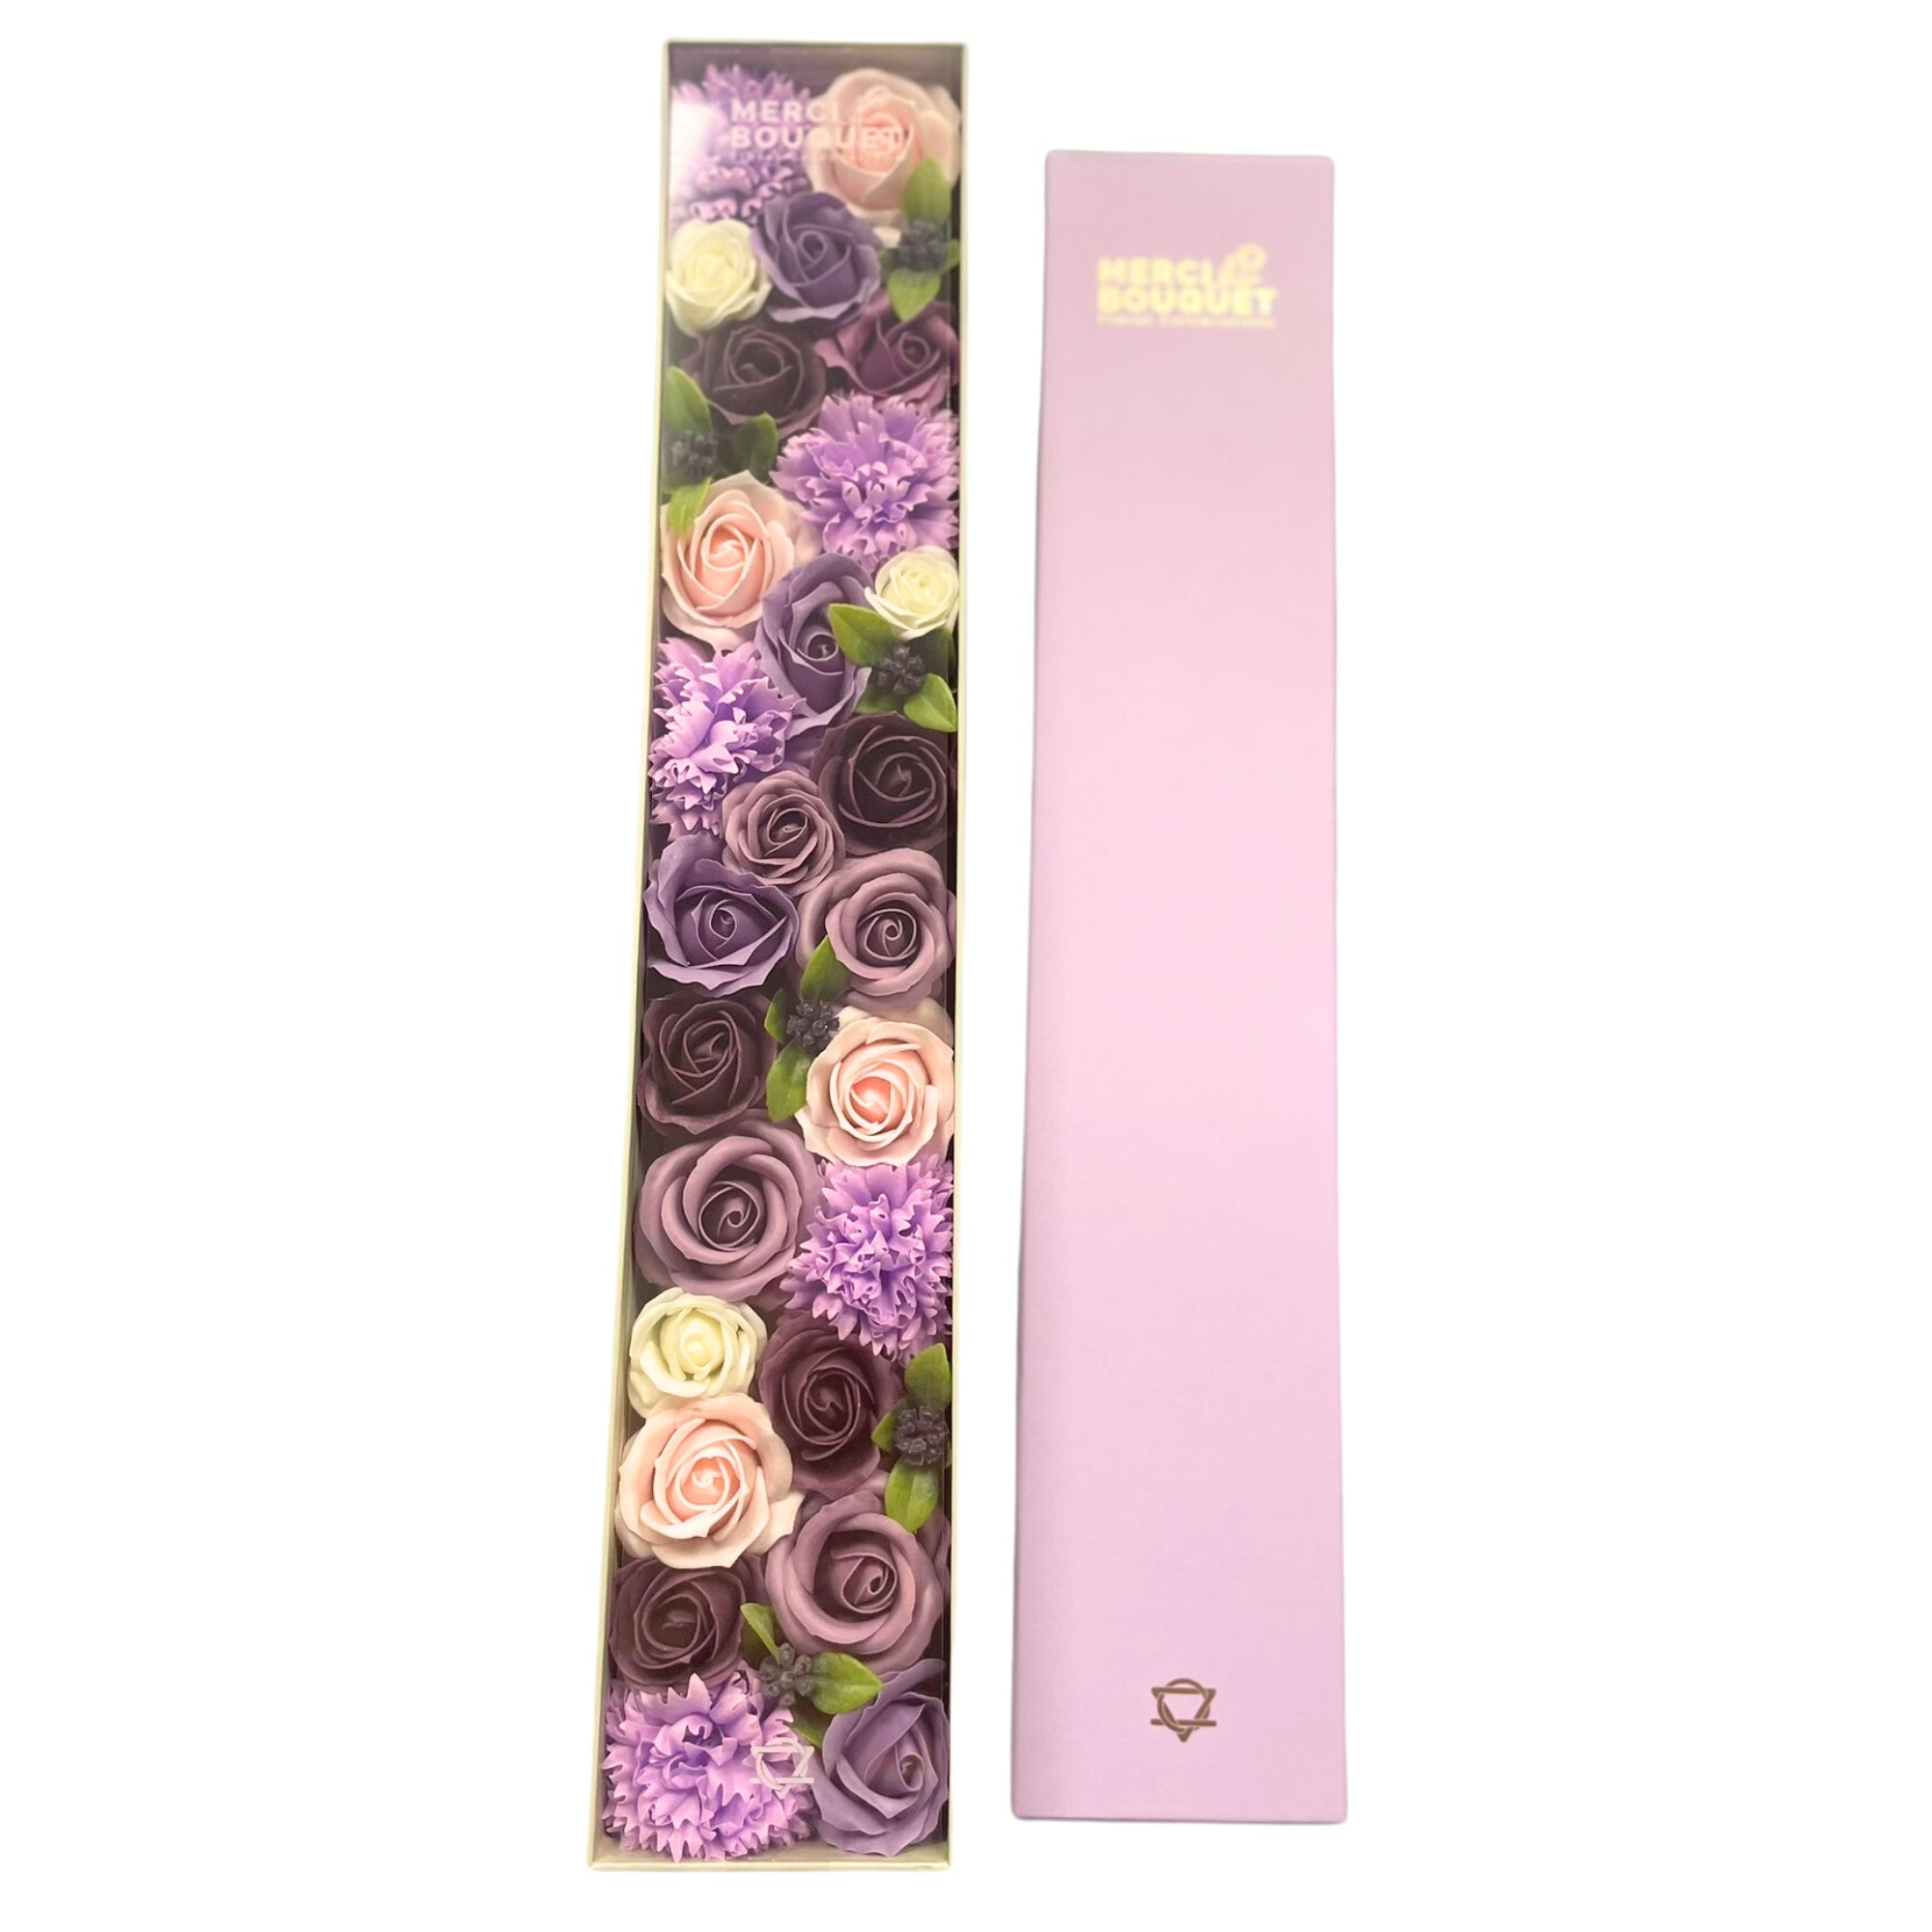 View Extra Long Lavender Rose Carnation information